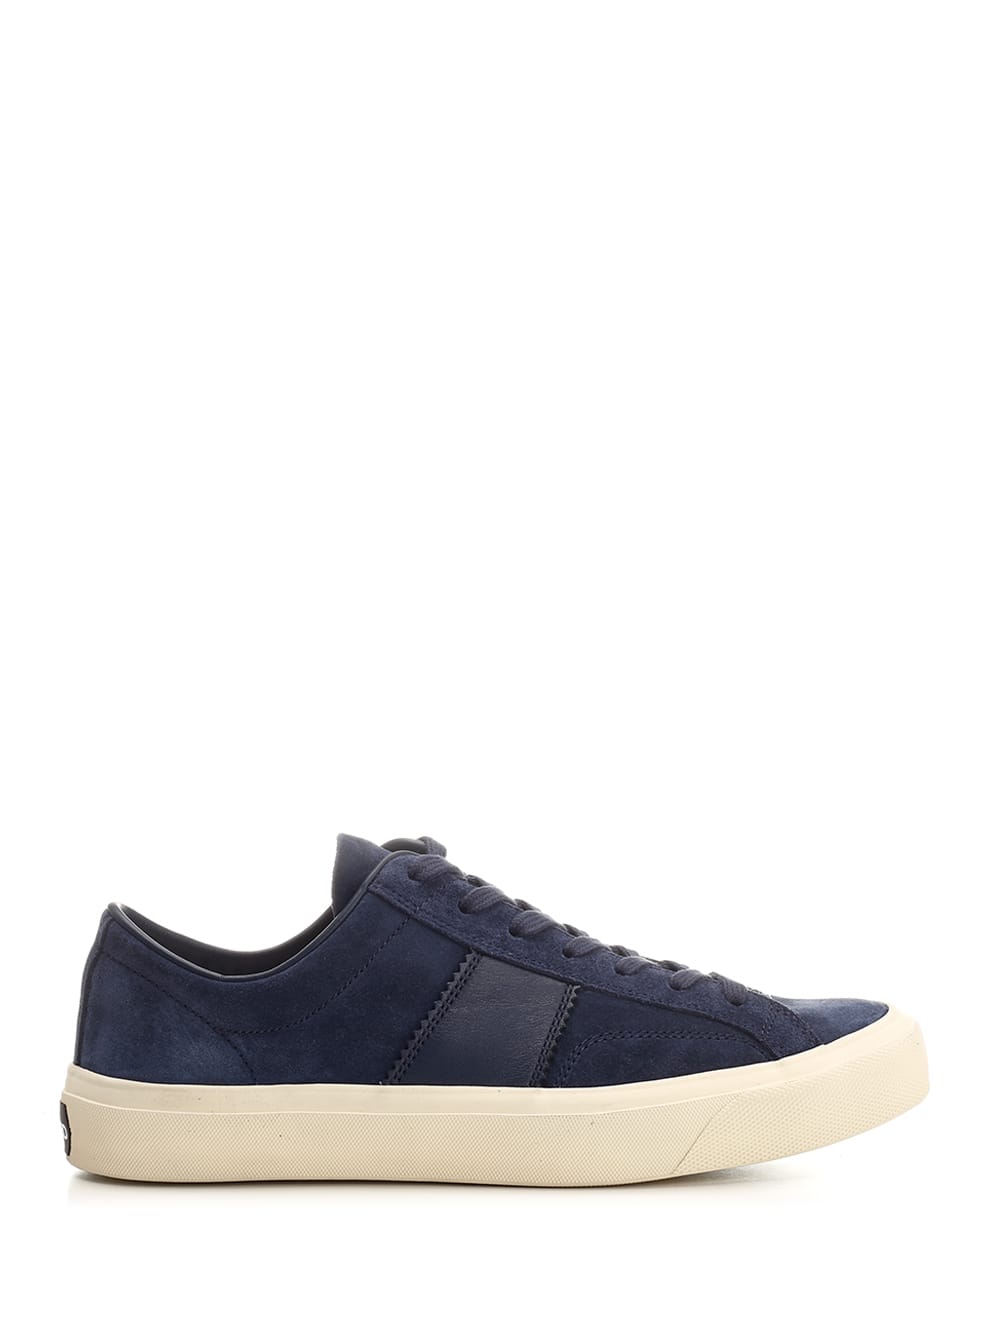 TOM FORD BLUE SUEDE SNEAKERS